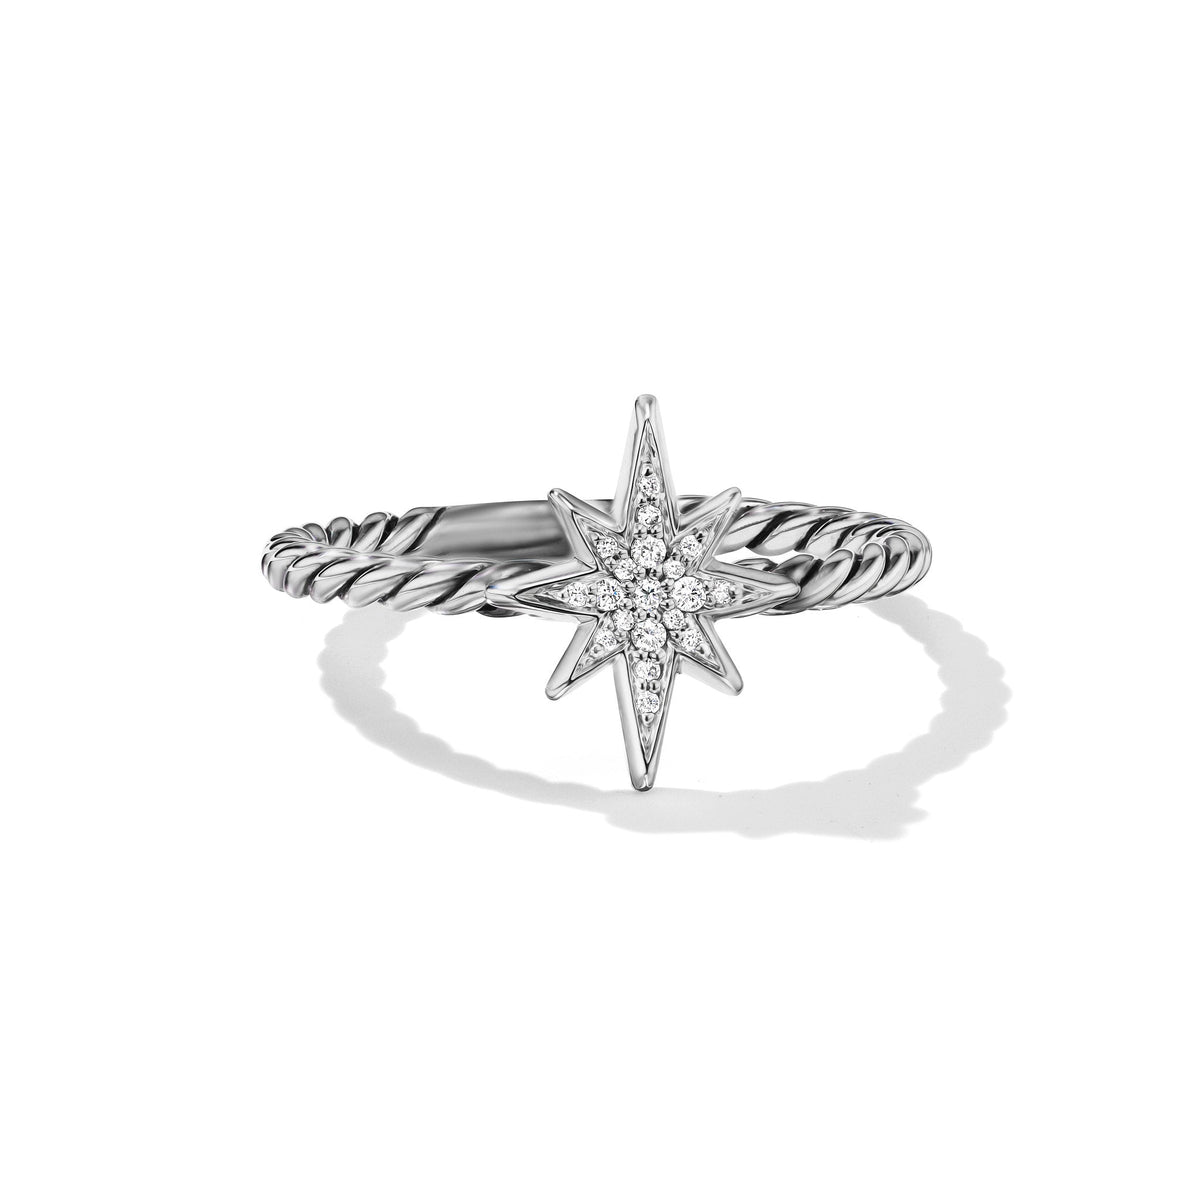 Cable Collectibles® North Star Stack Ring with Pavé Diamonds, Sterling Silver, Long's Jewelers